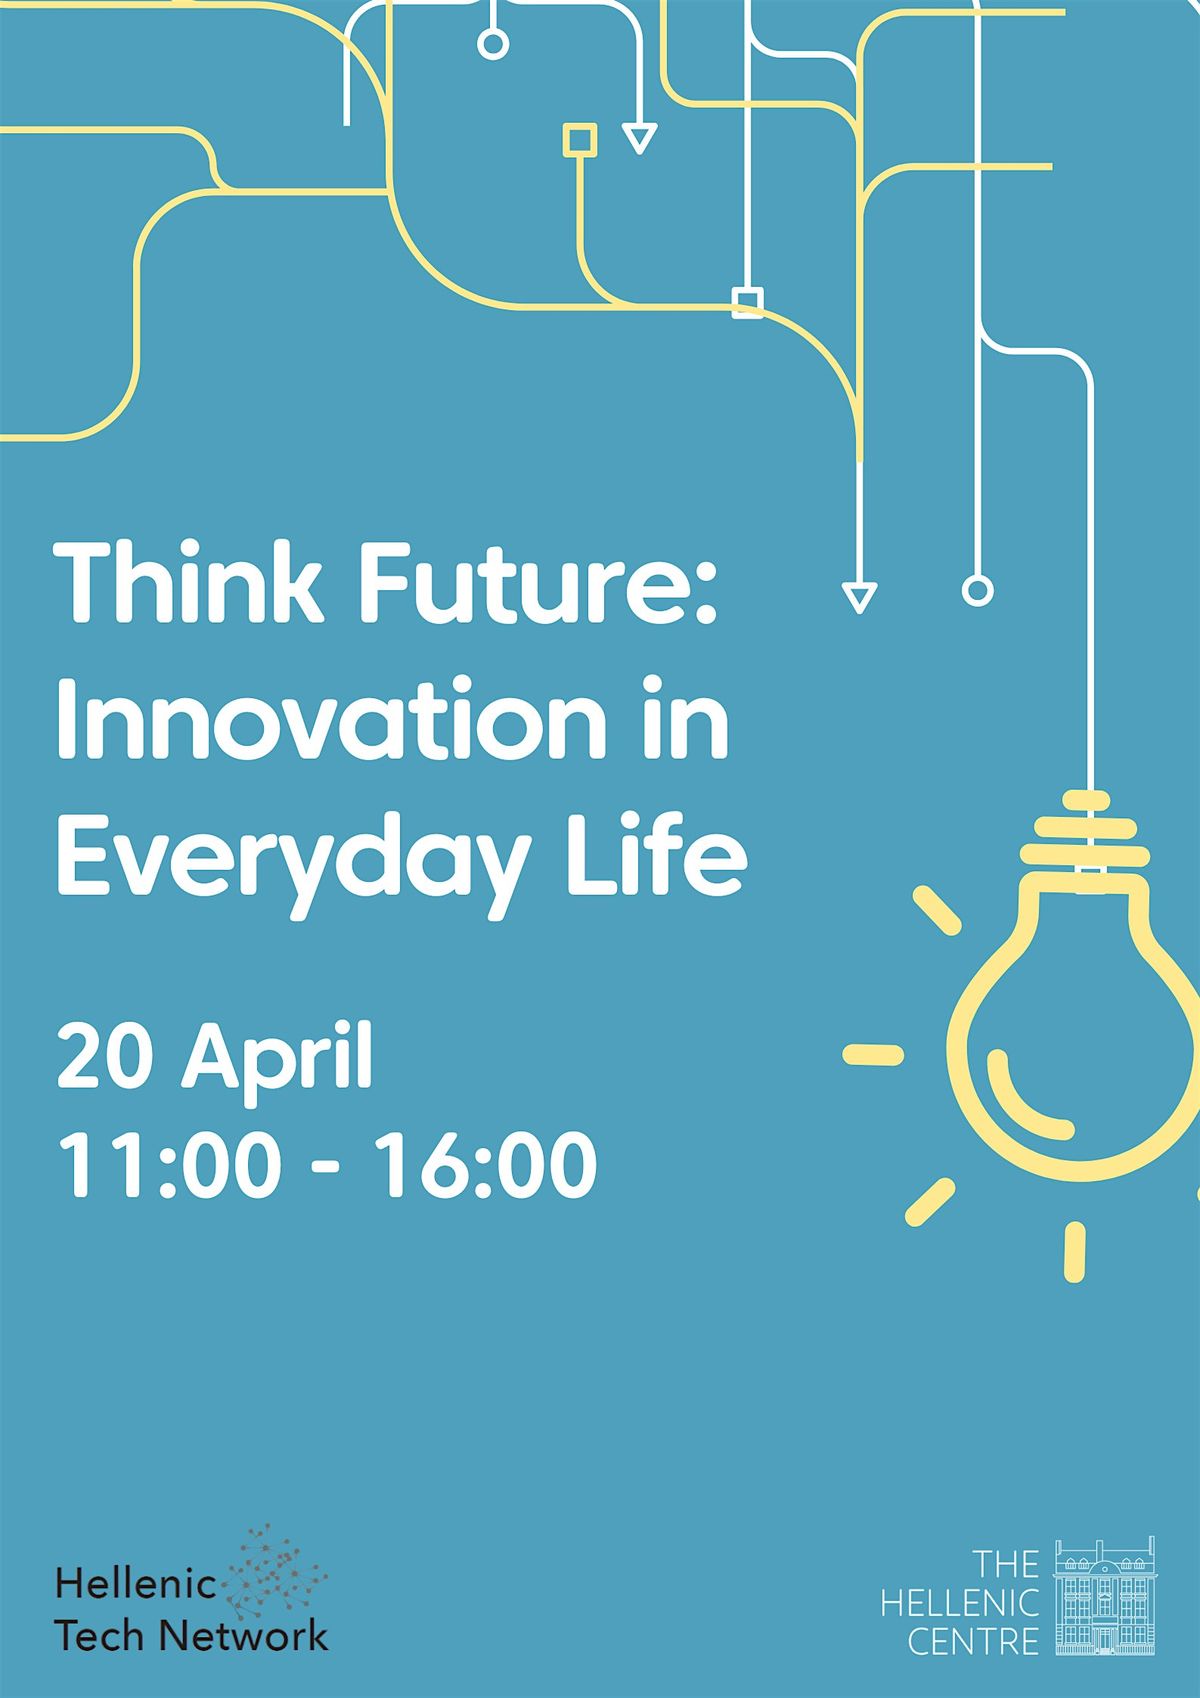 Think Future: Innovation in Everyday Life